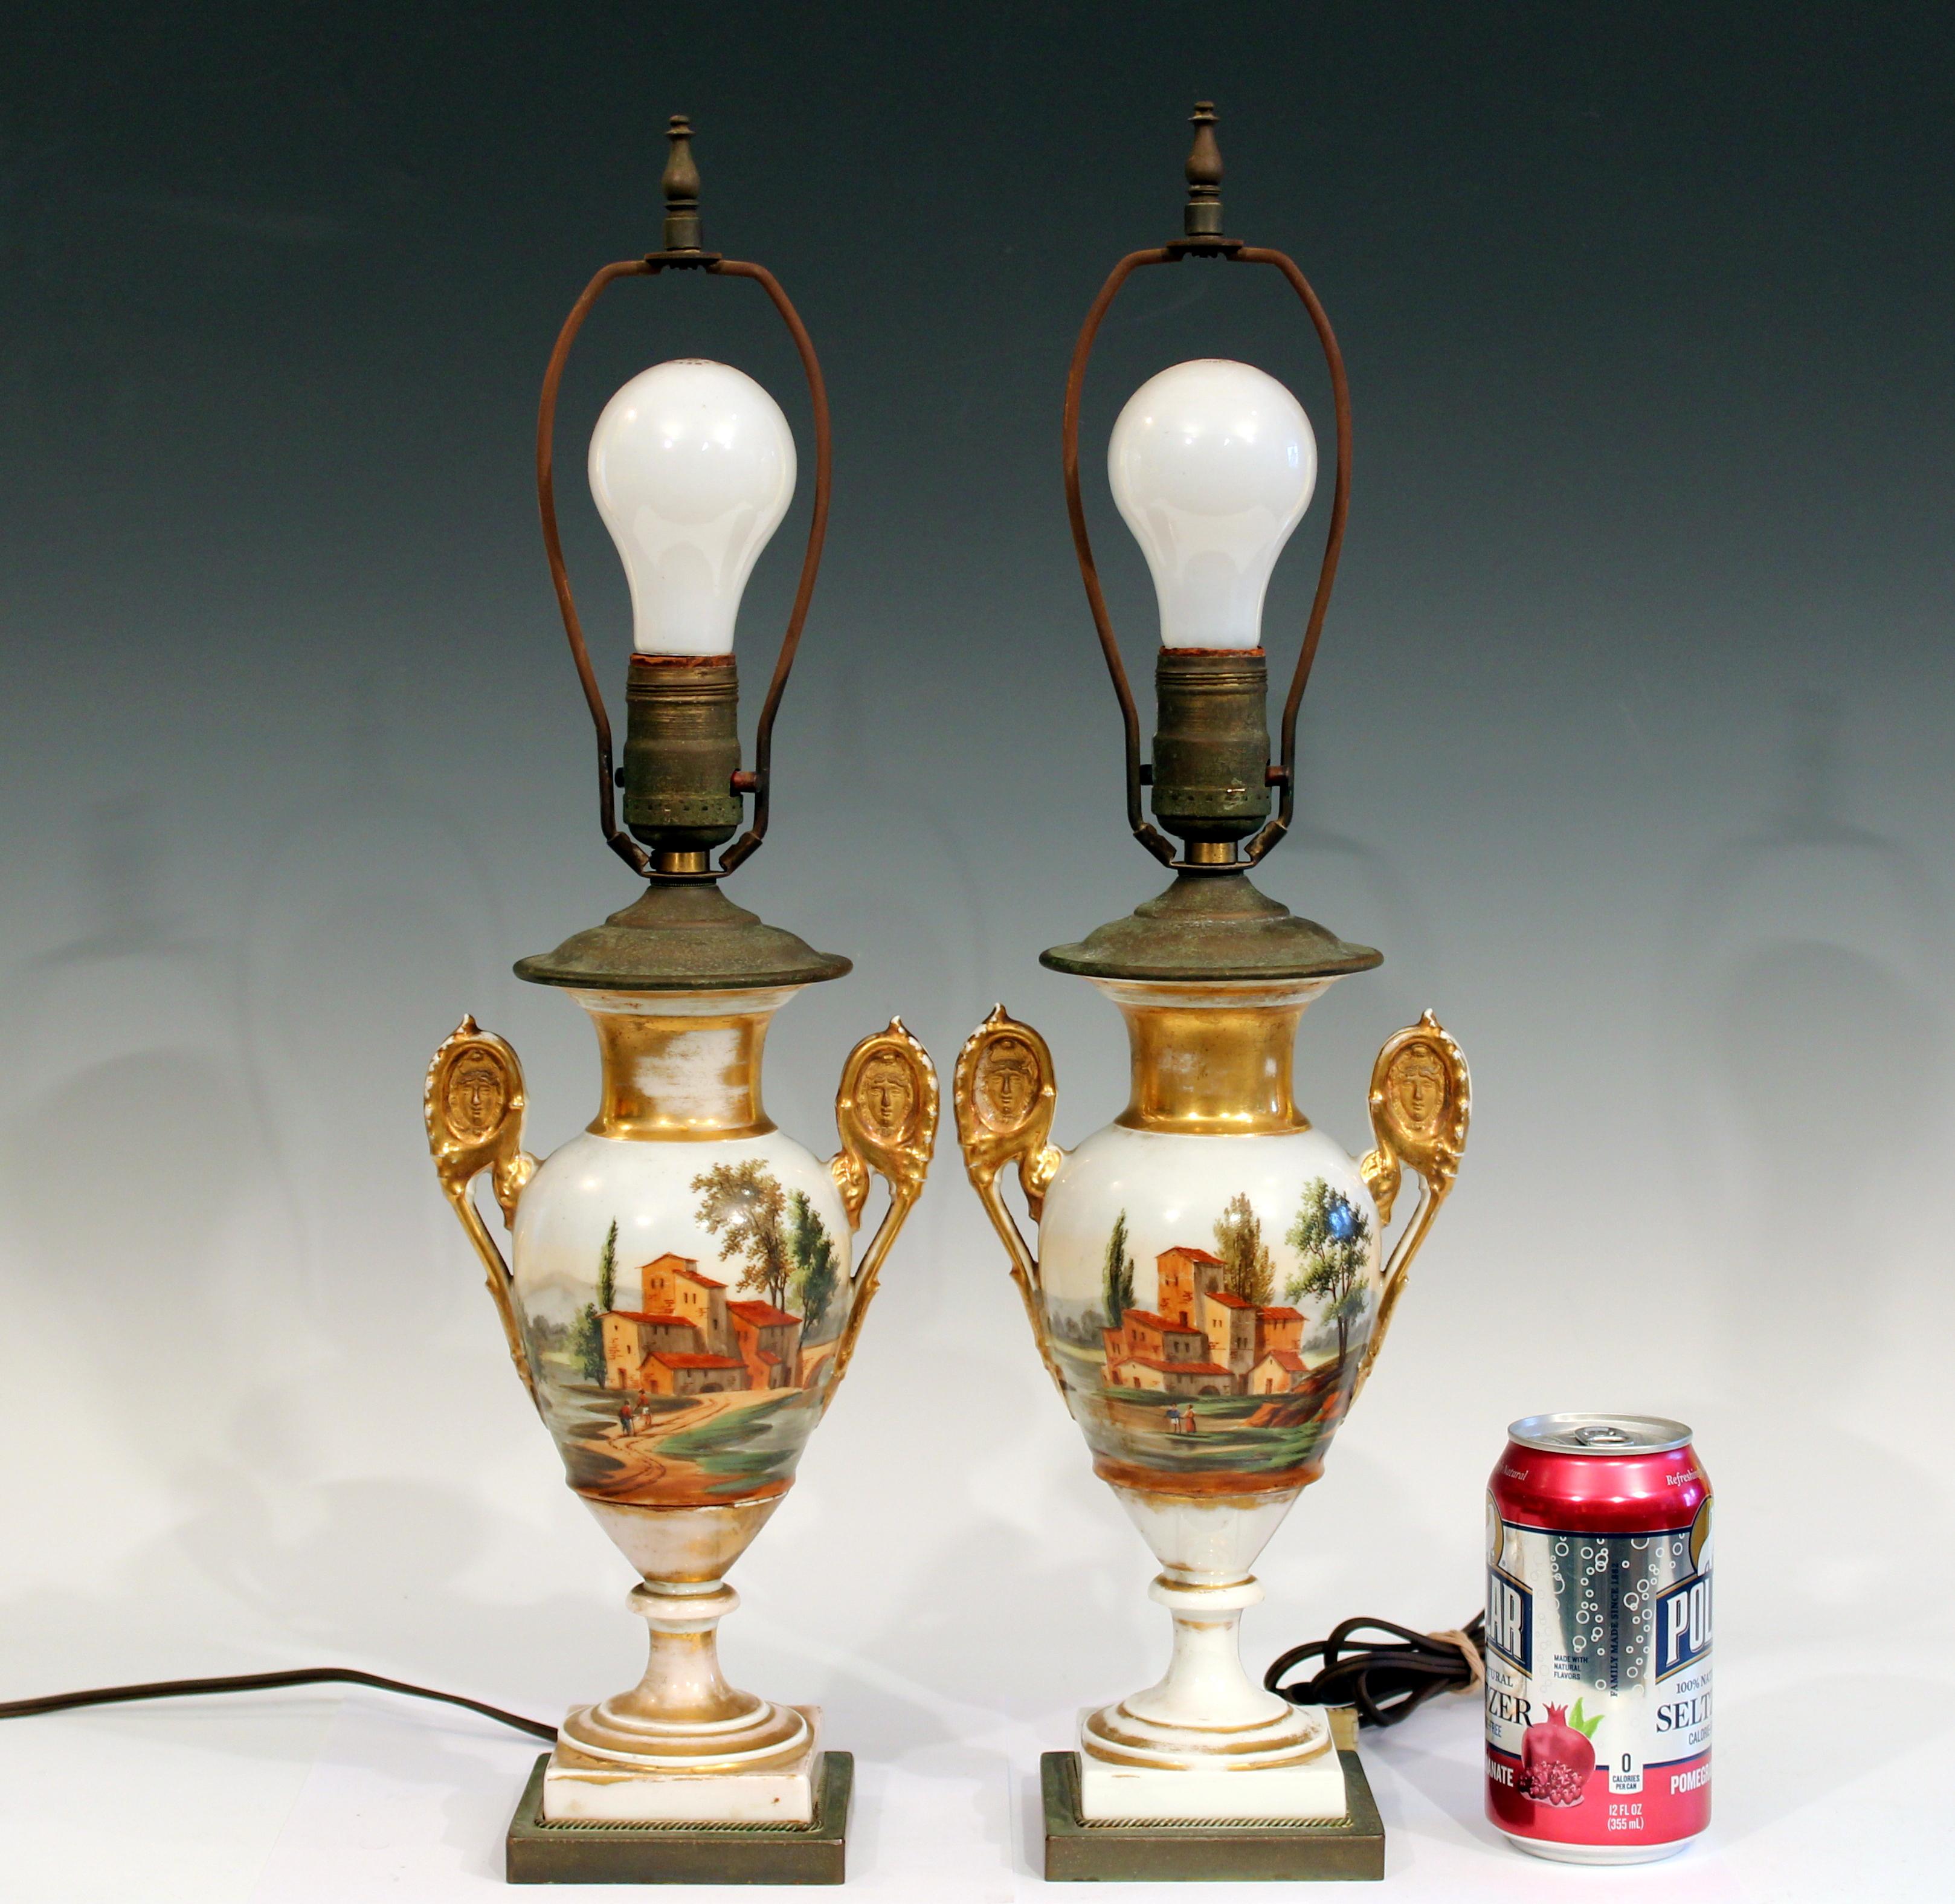 Hand-Crafted Pair of Old Paris Porcelain French Vases Lamps Country, 19th Century Garniture